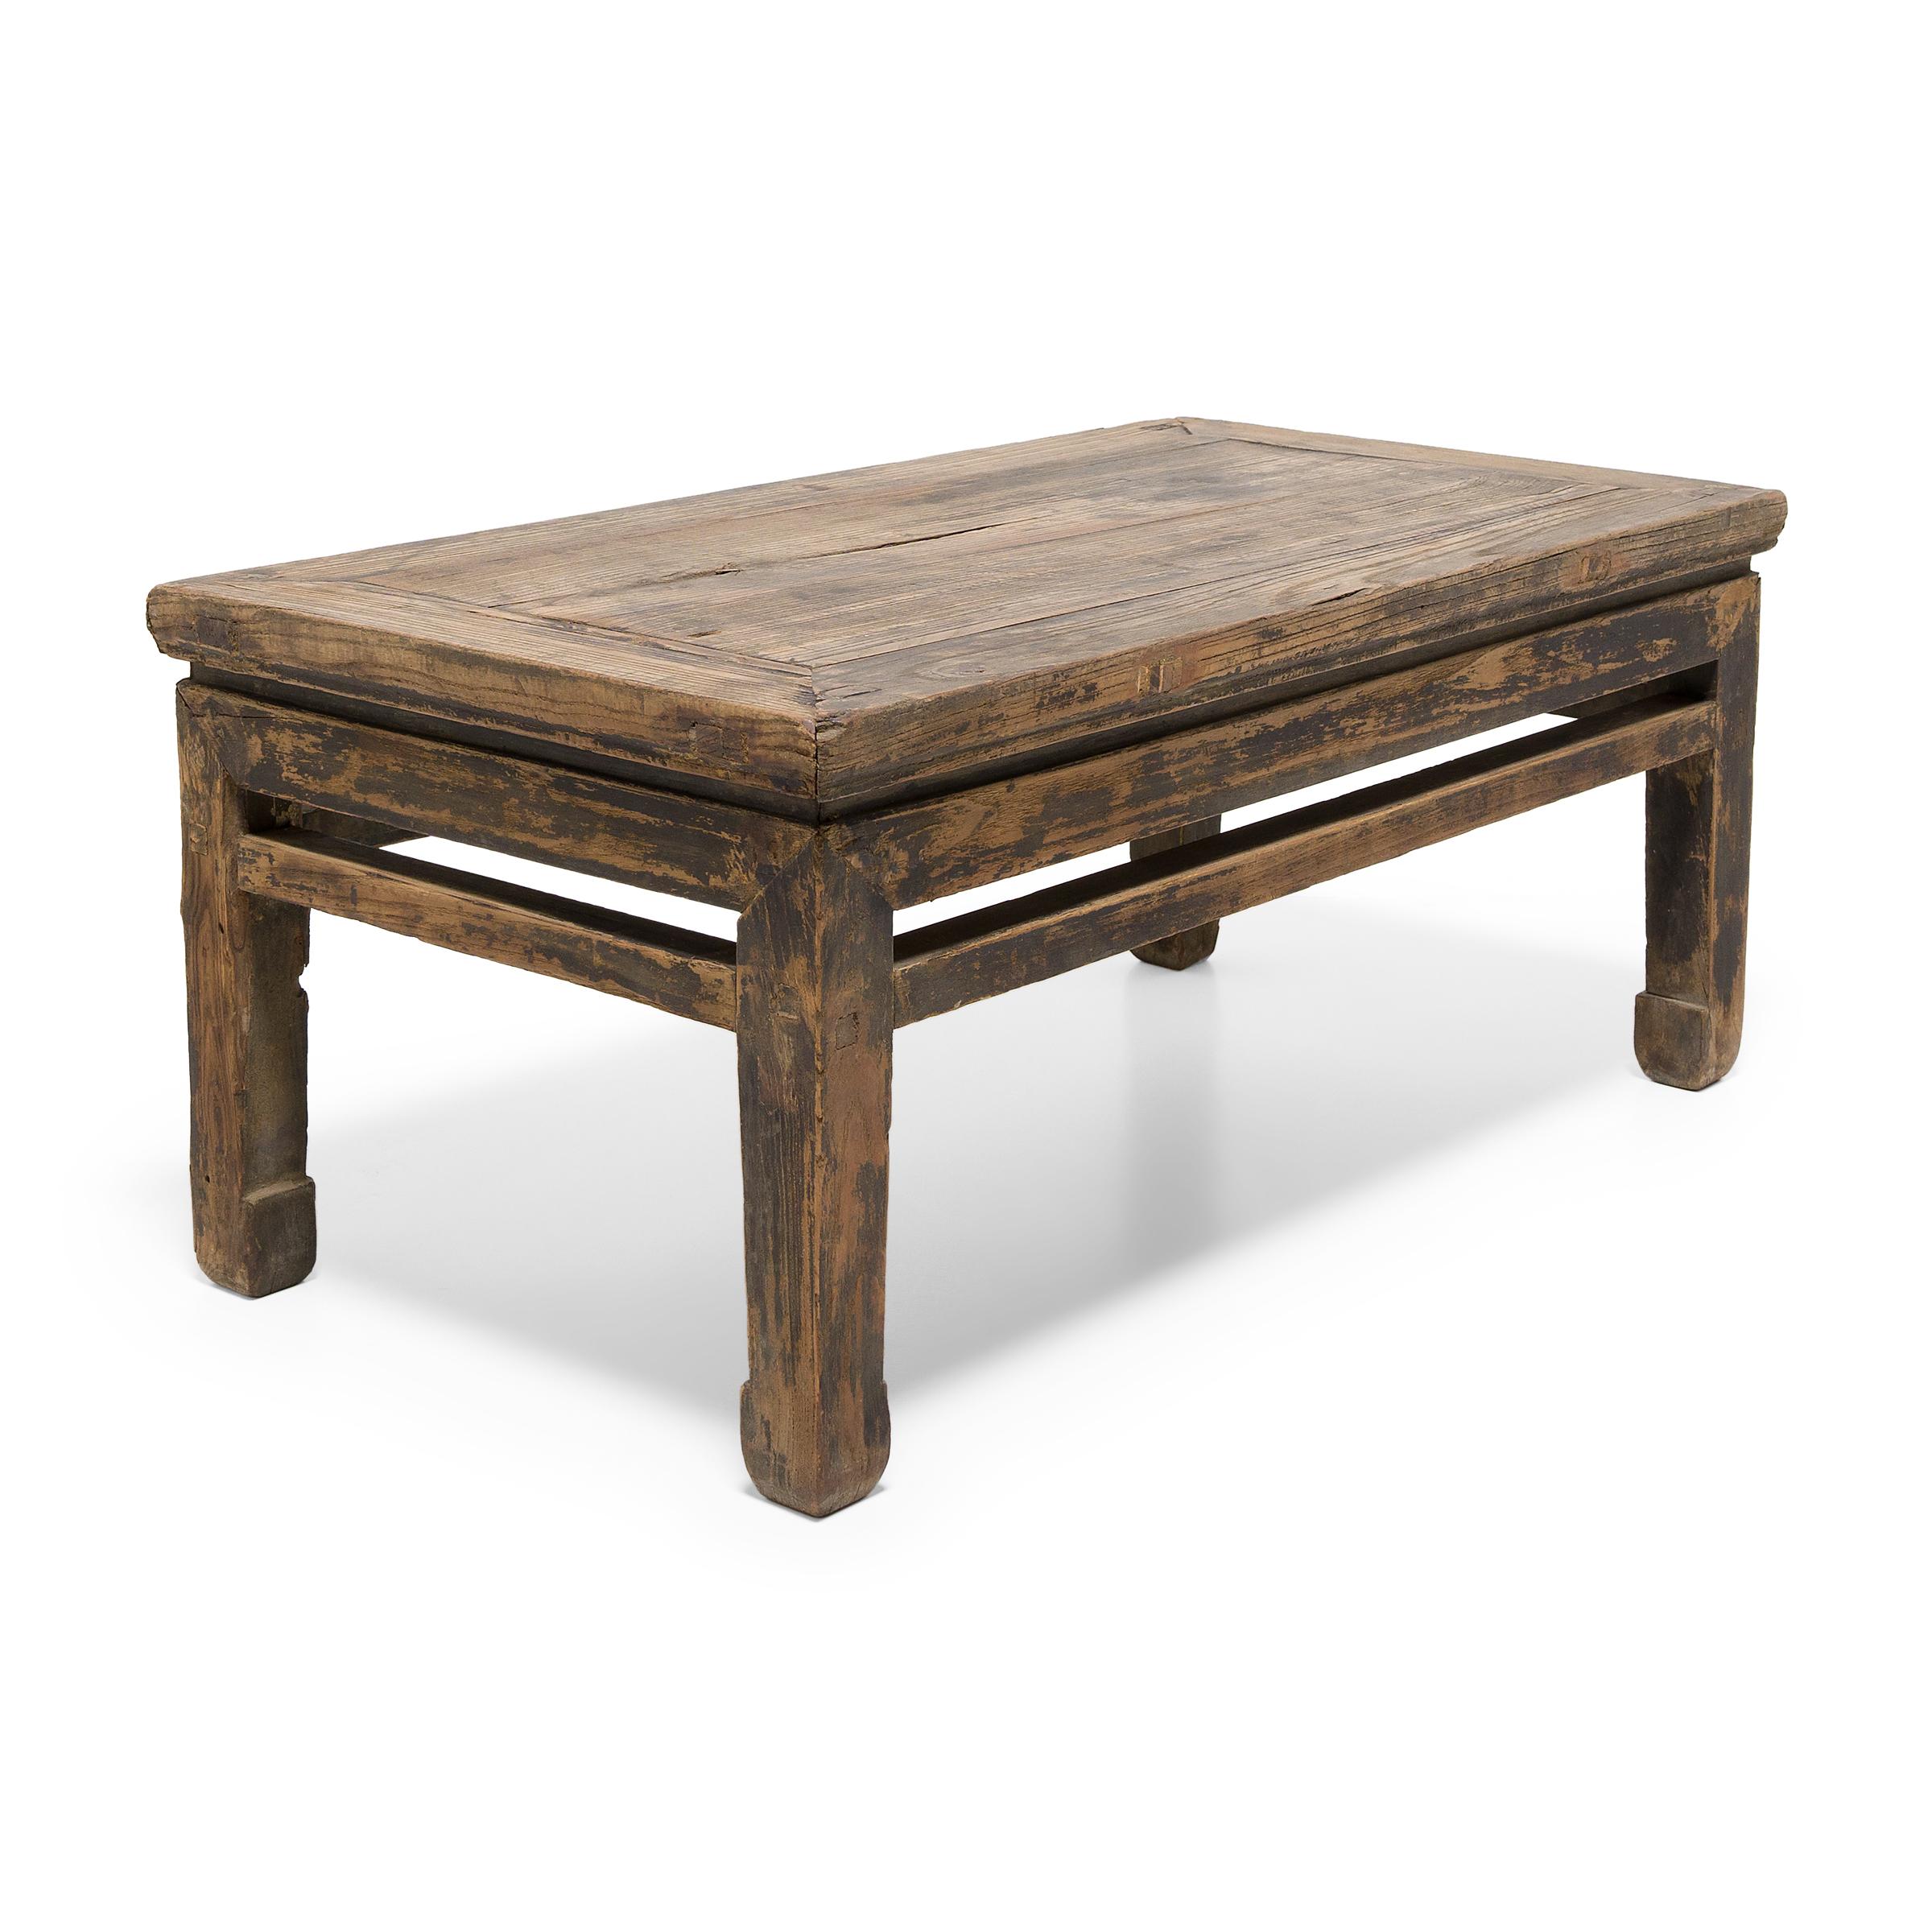 19th Century Provincial Chinese Kang Table, C. 1800